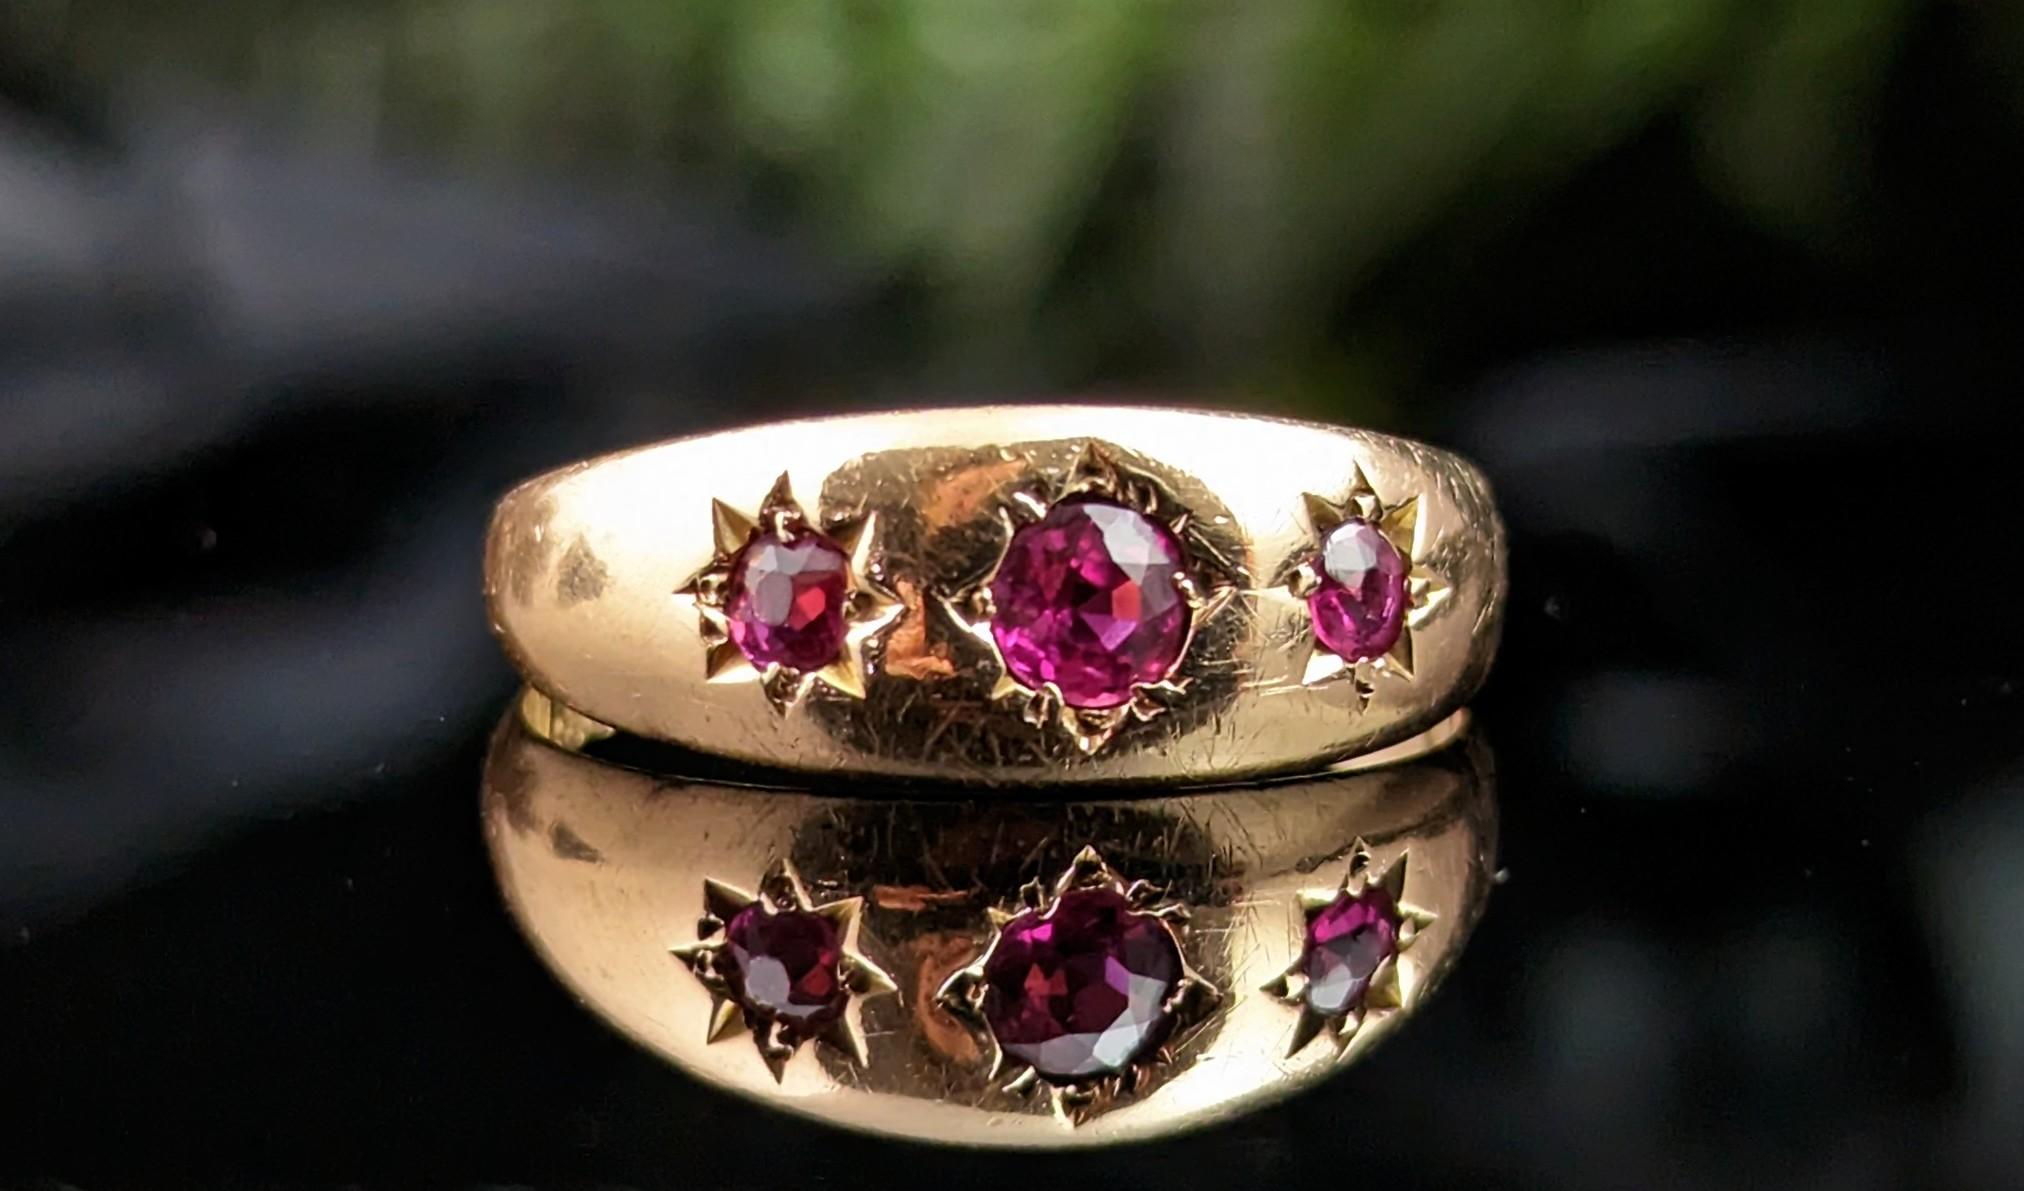 You can't help but be enamoured by this stunning antique, Victorian era, Ruby Gypsy set ring in 18kt yellow gold.

One of our favourite styles here at StolenAttic and a firm customer favourite.

This beautiful ring is a three stone, Gypsy set ring